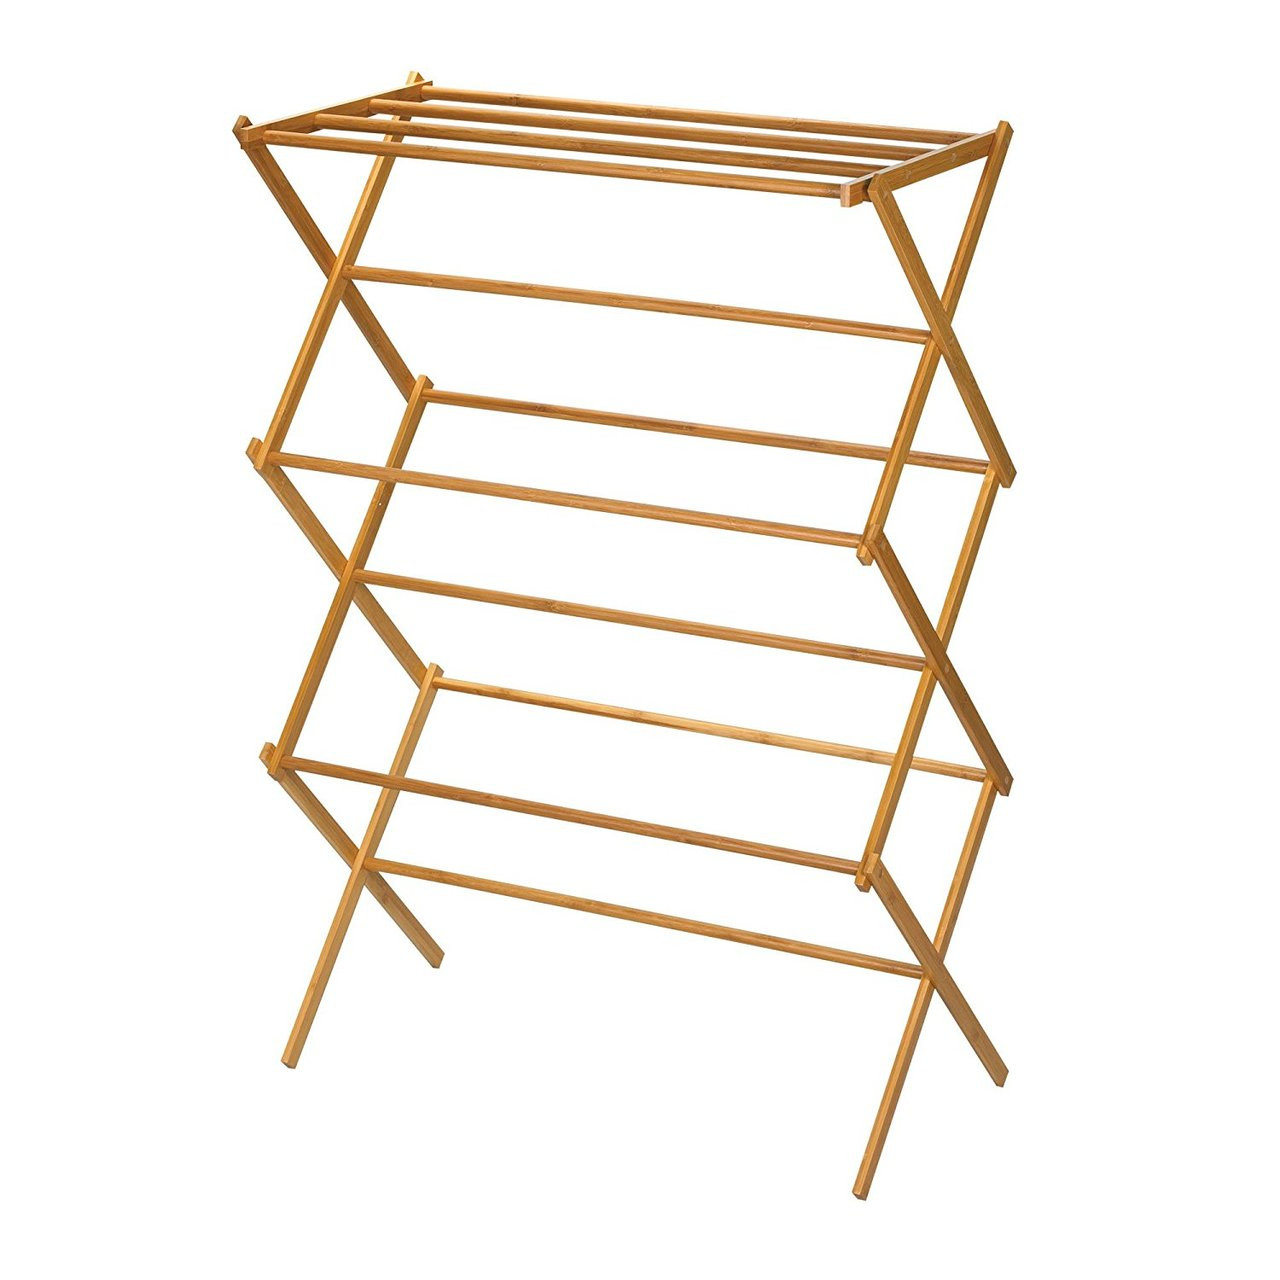 Bamboo Clothes Dry Rack Towel Hanger Air Drying Horse Laundry Aussie Stock  - UltraSaver